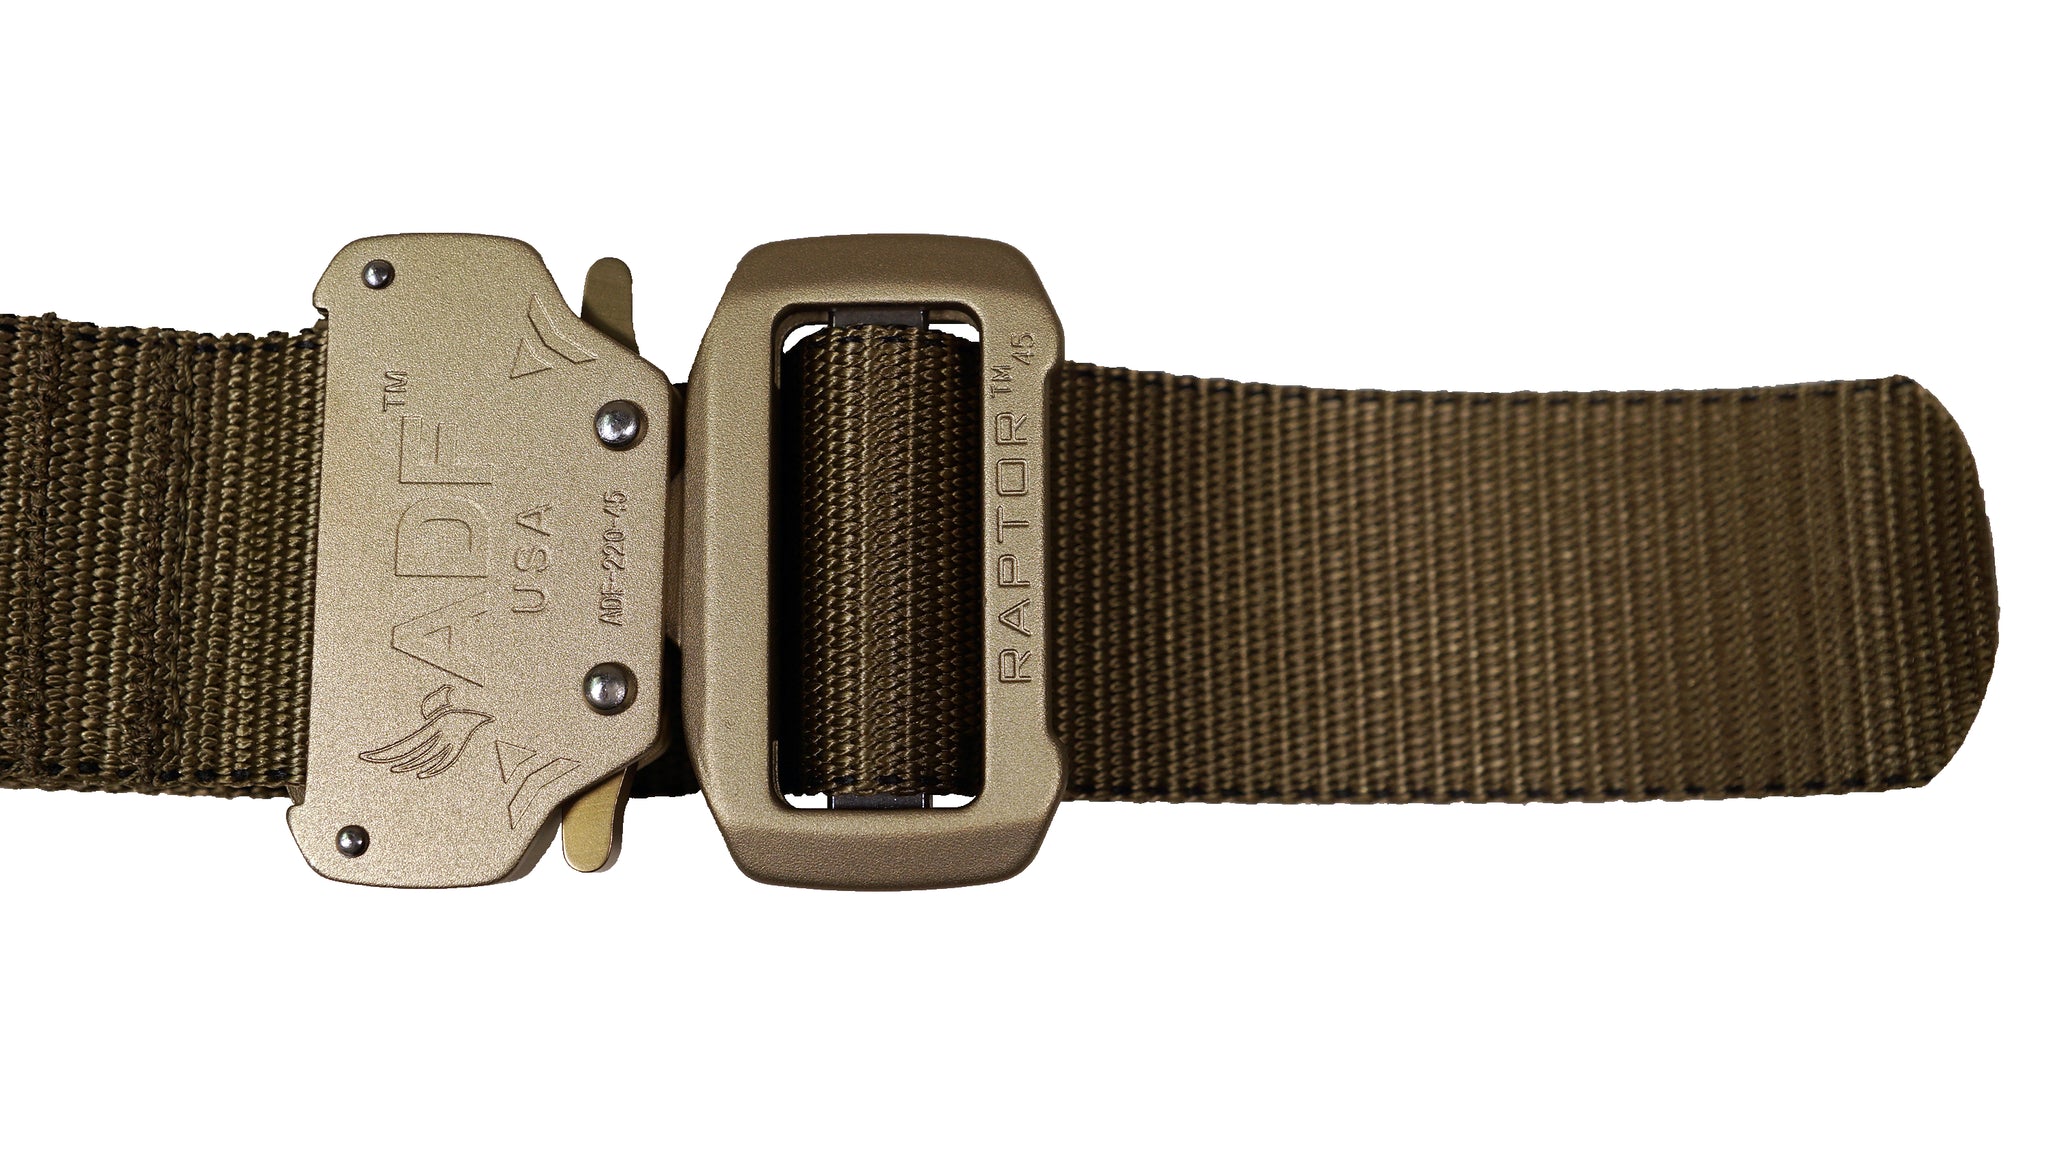 Tan/Coyote DBF Belt: Zoomed-in view of Raptor buckle with rivets and quick release latches.